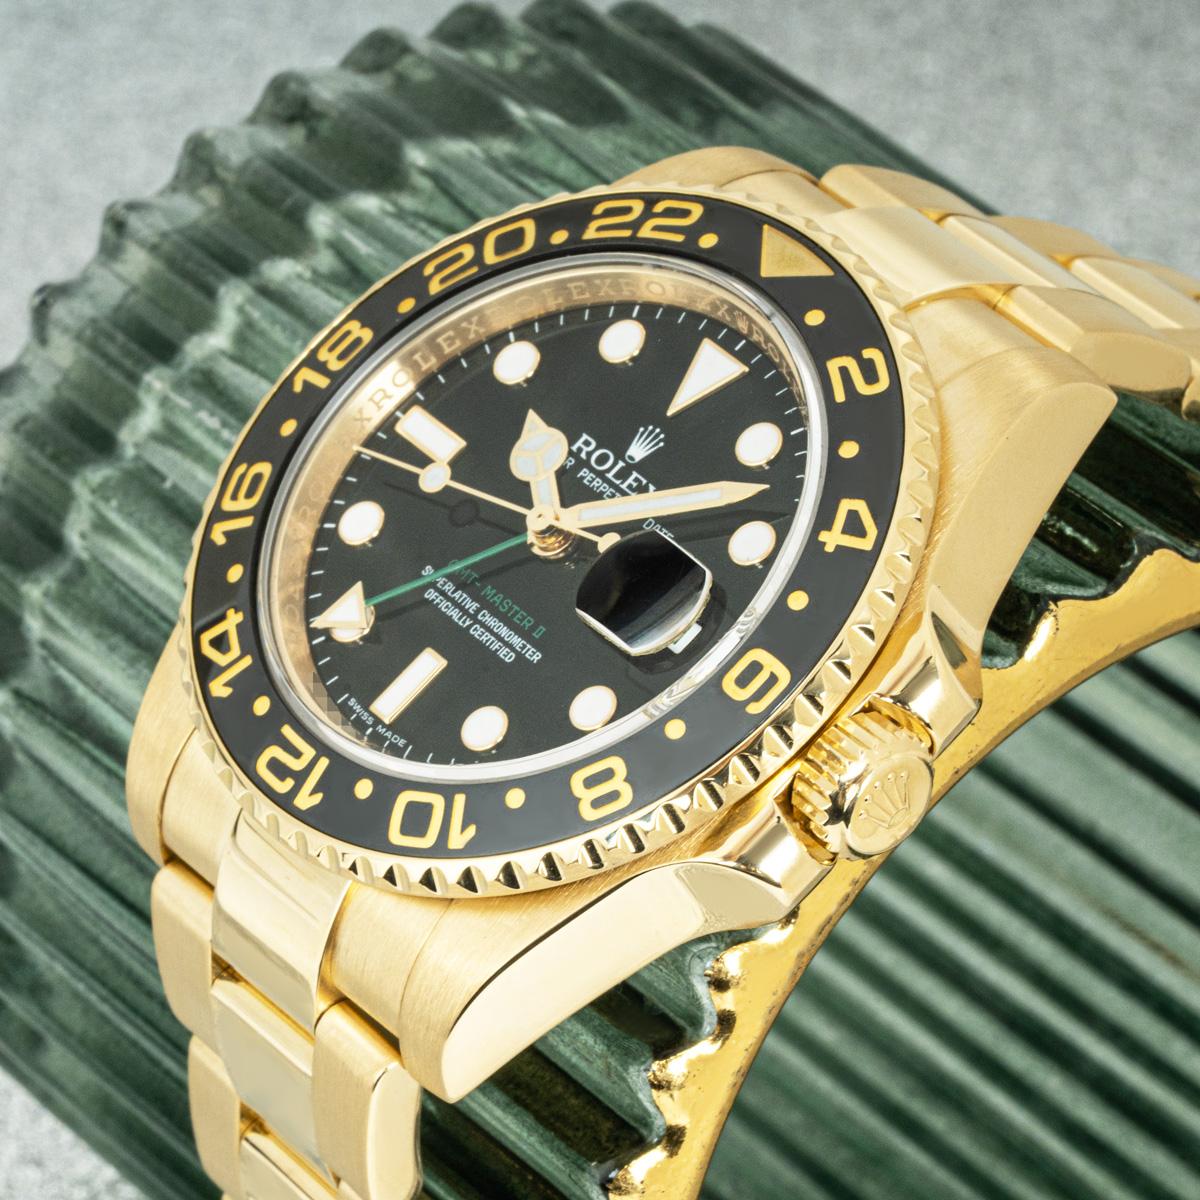 A men's GMT-Master II wristwatch crafted in 18k yellow gold by Rolex. Featuring a black dial with applied hour markers, date aperture and a green second-time zone hand. Complementing the dial is an 18k yellow gold bi-directional rotatable bezel with